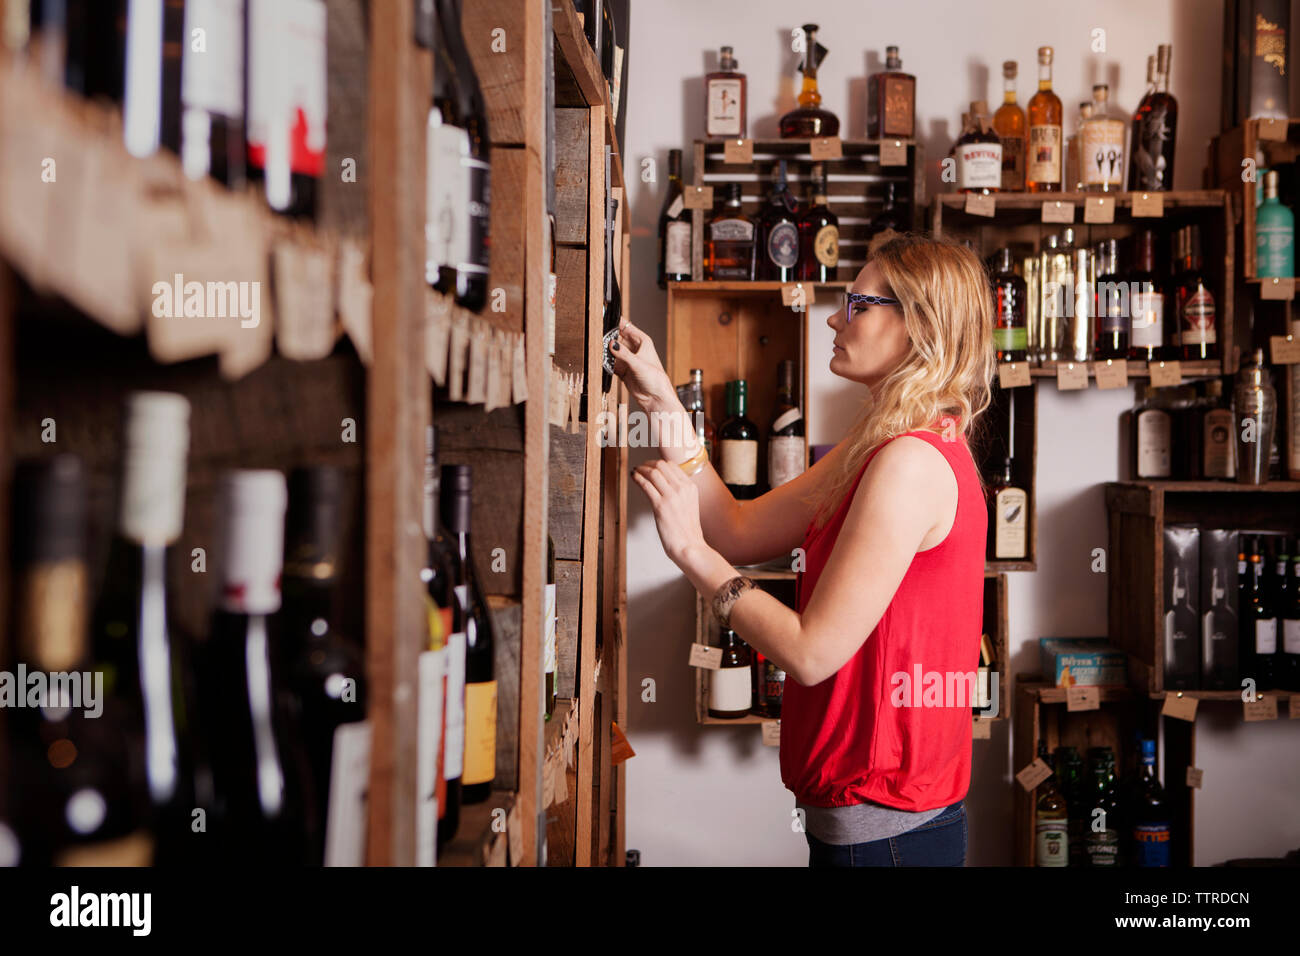 Side view of female business owner examining wine bottles at shop Stock Photo